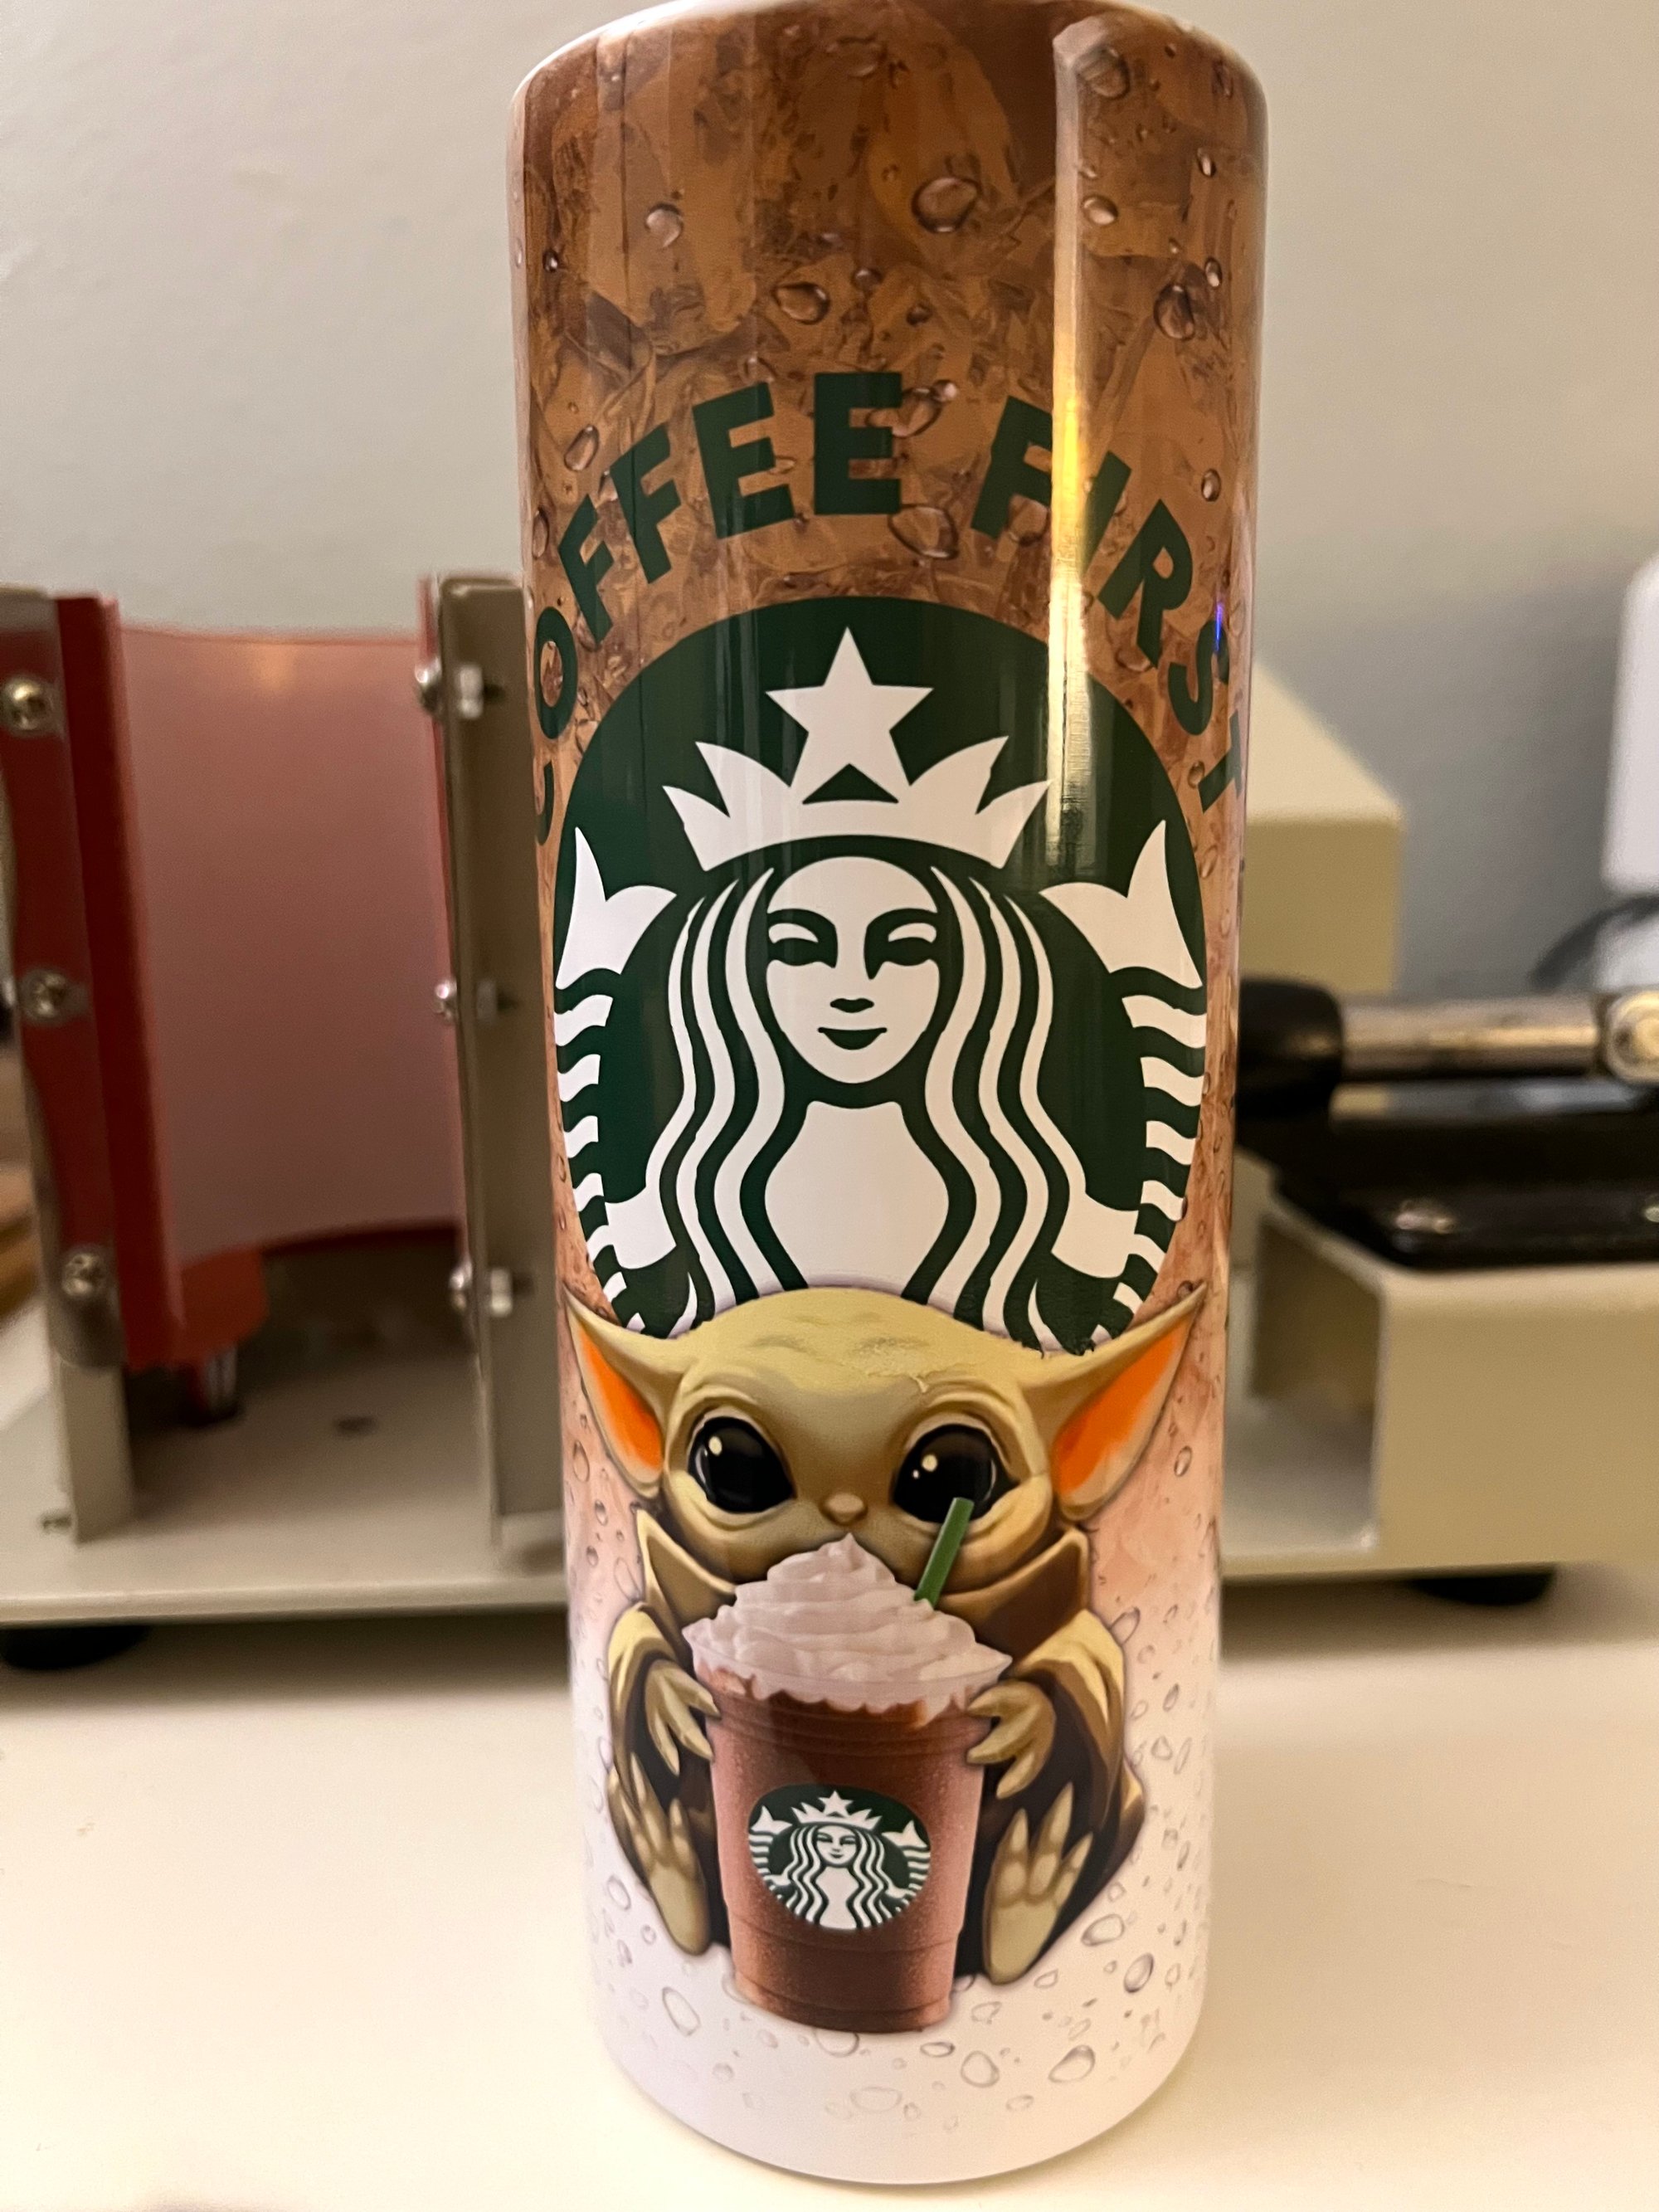 https://assets.bigcartel.com/product_images/840ddd20-ef6d-4cfa-a504-c6890e6d575f/coffee-first-baby-yoda-tumbler.jpg?auto=format&fit=max&w=2000